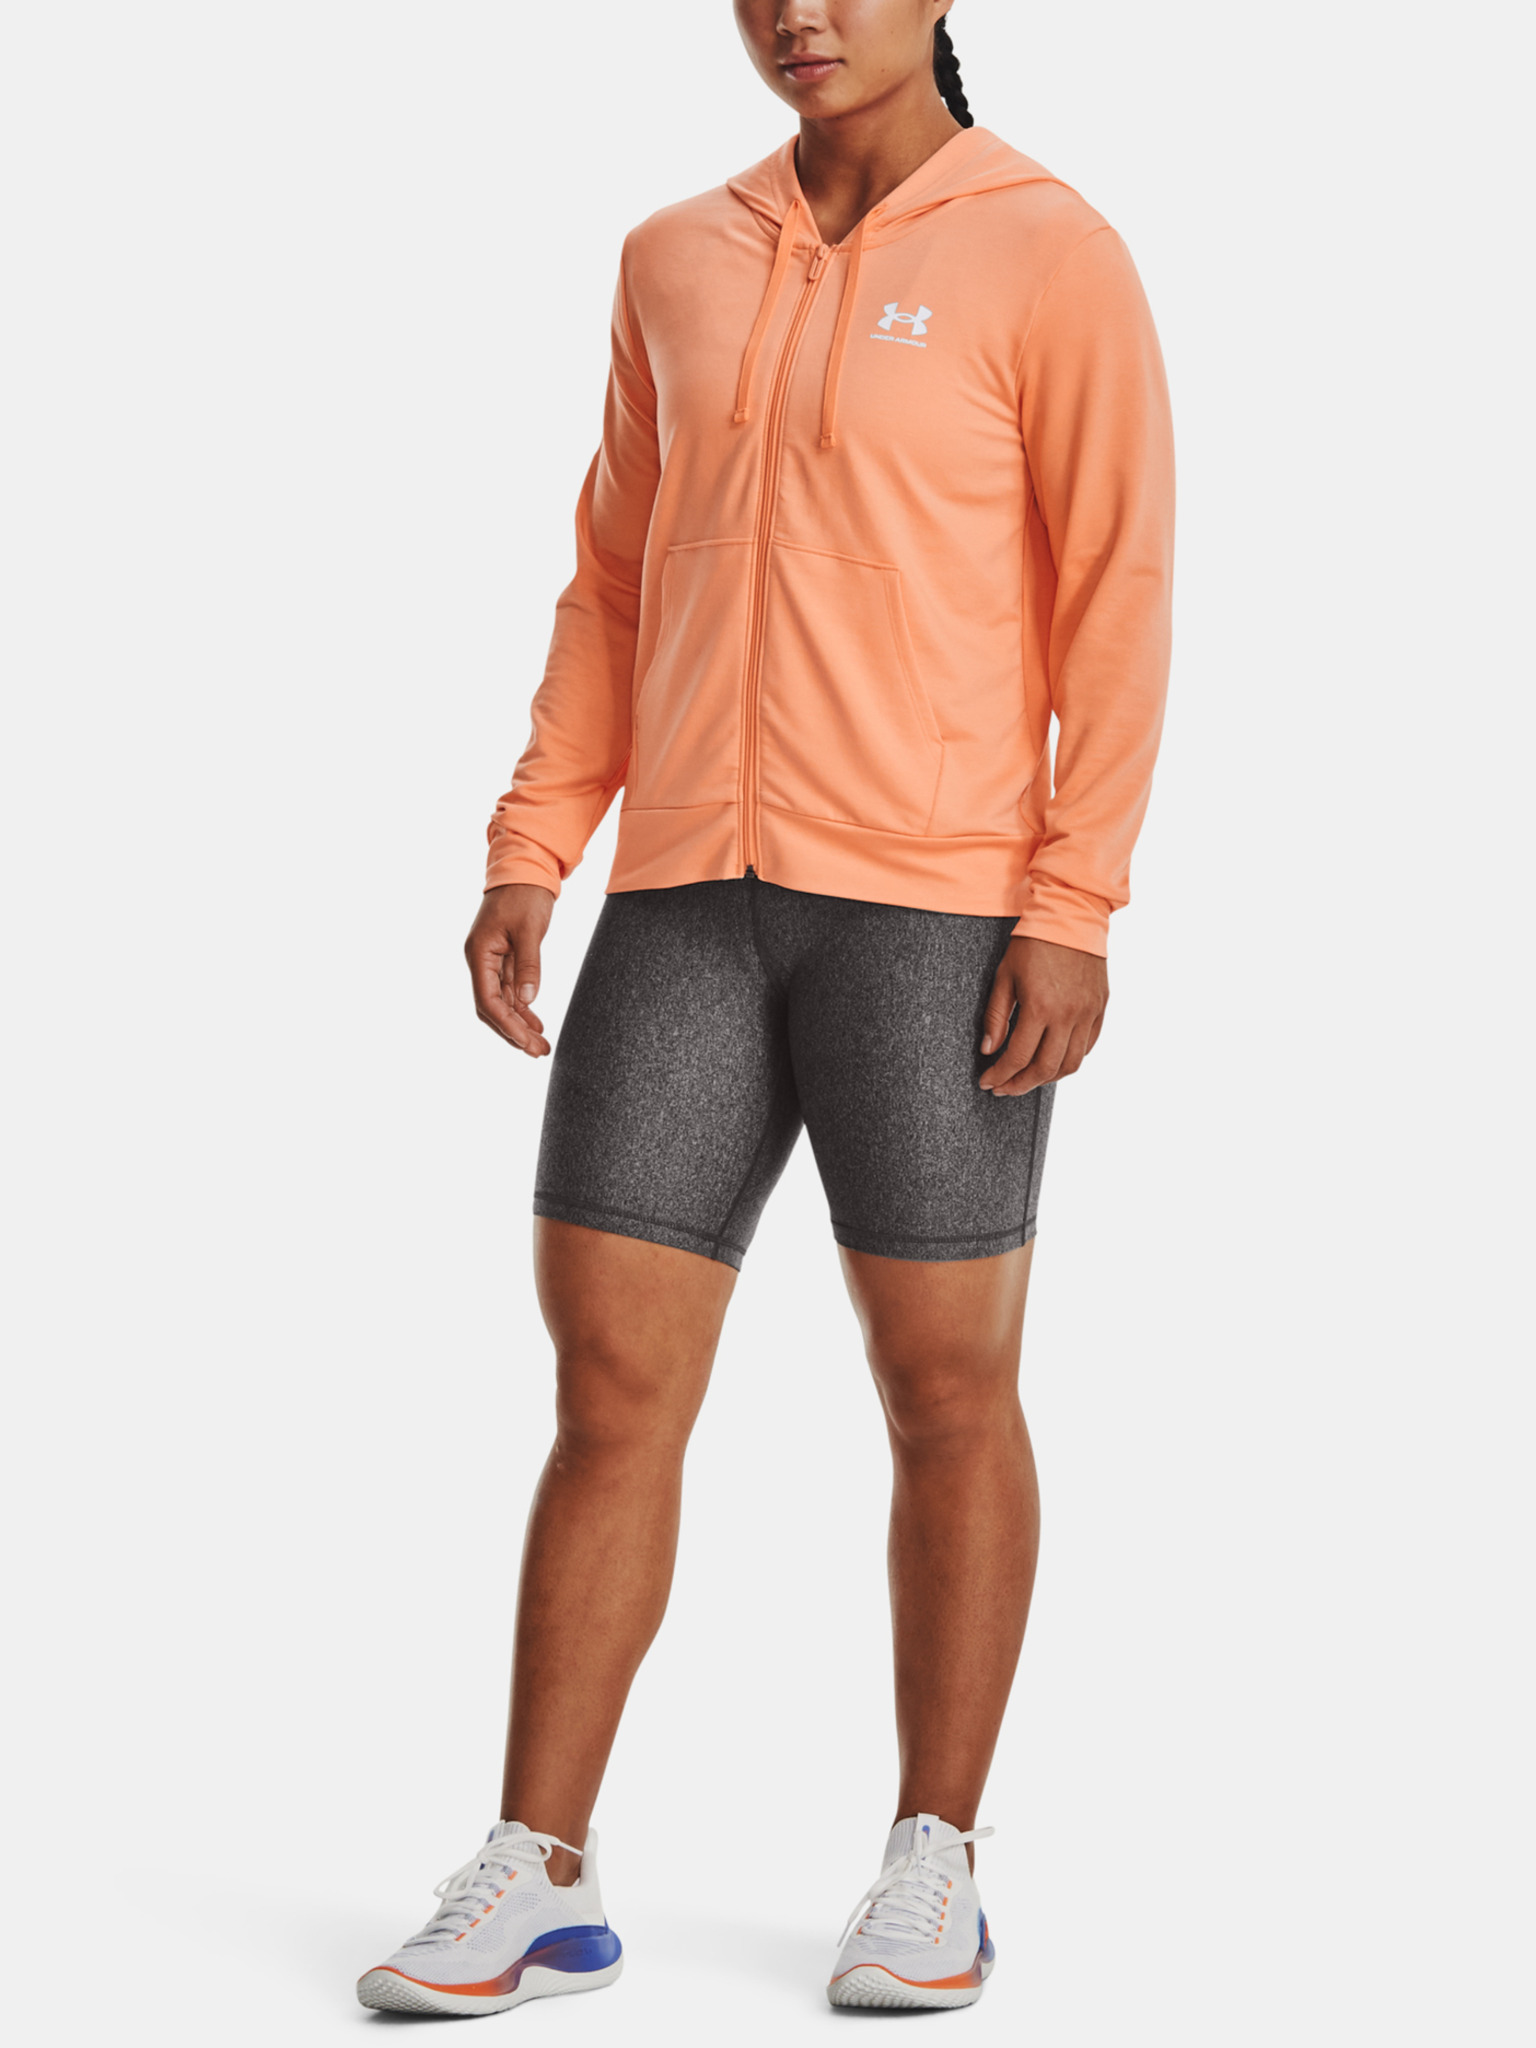 Under Armour - Rival Terry Sweatshirt